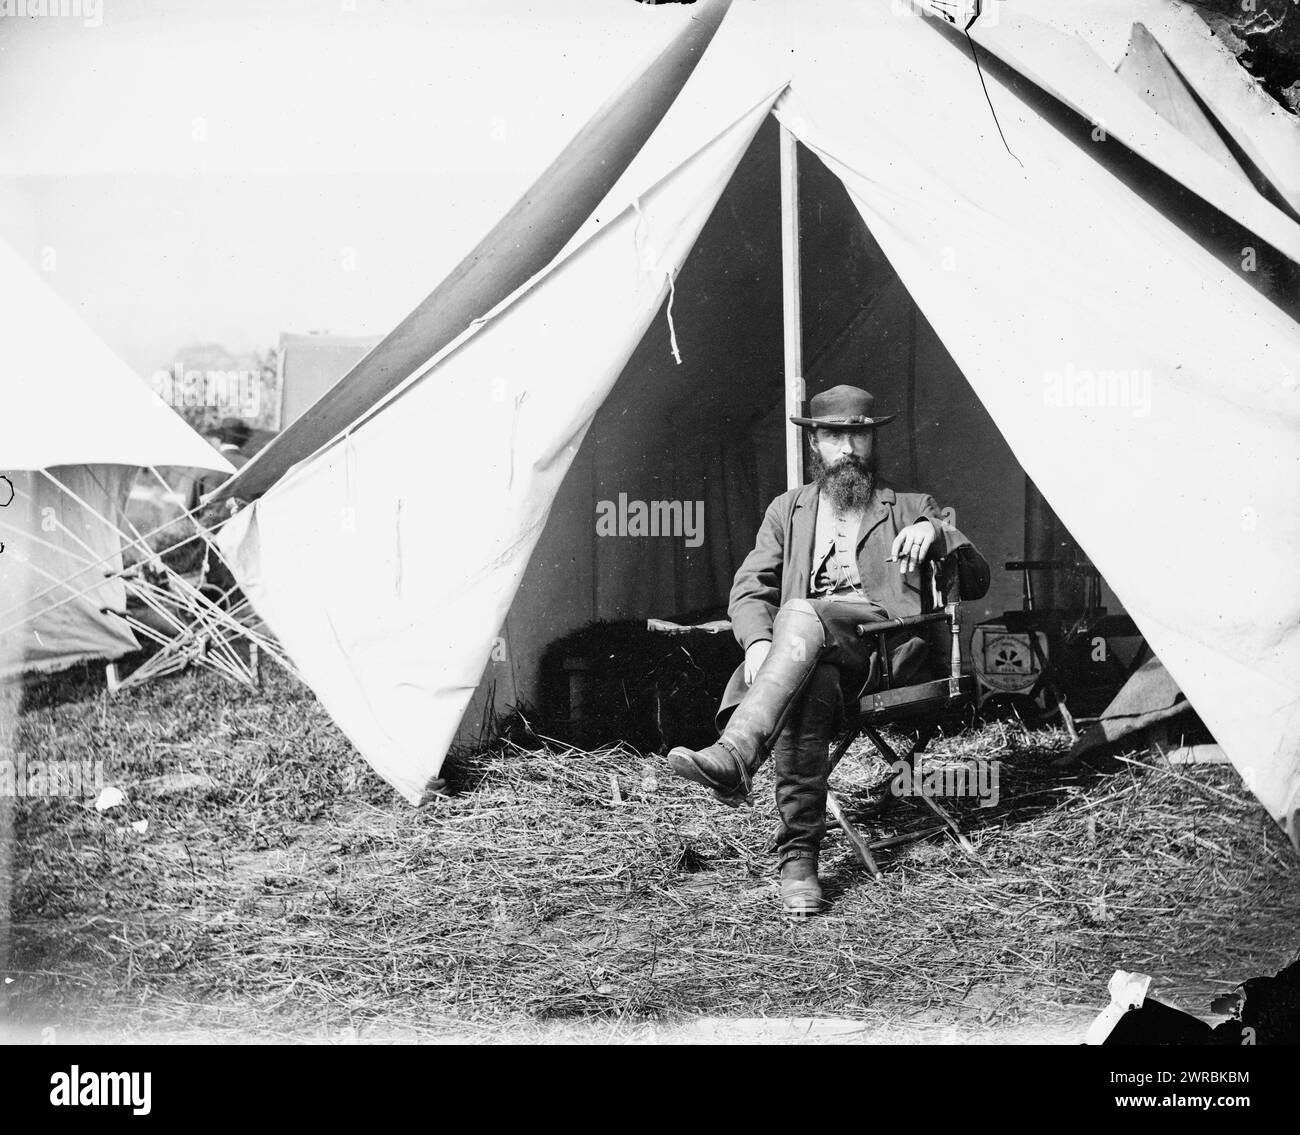 Daniel Cole, A Federal scout at Secret Service Department Headquarters, Army of Potomac, between 1861 and 1865, United States, History, Civil War, 1861-1865, Glass negatives, 1860-1870., Stereographs, 1860-1870, Glass negatives, 1860-1870, 1 negative (2 plates): glass, stereograph, wet collodion Stock Photo